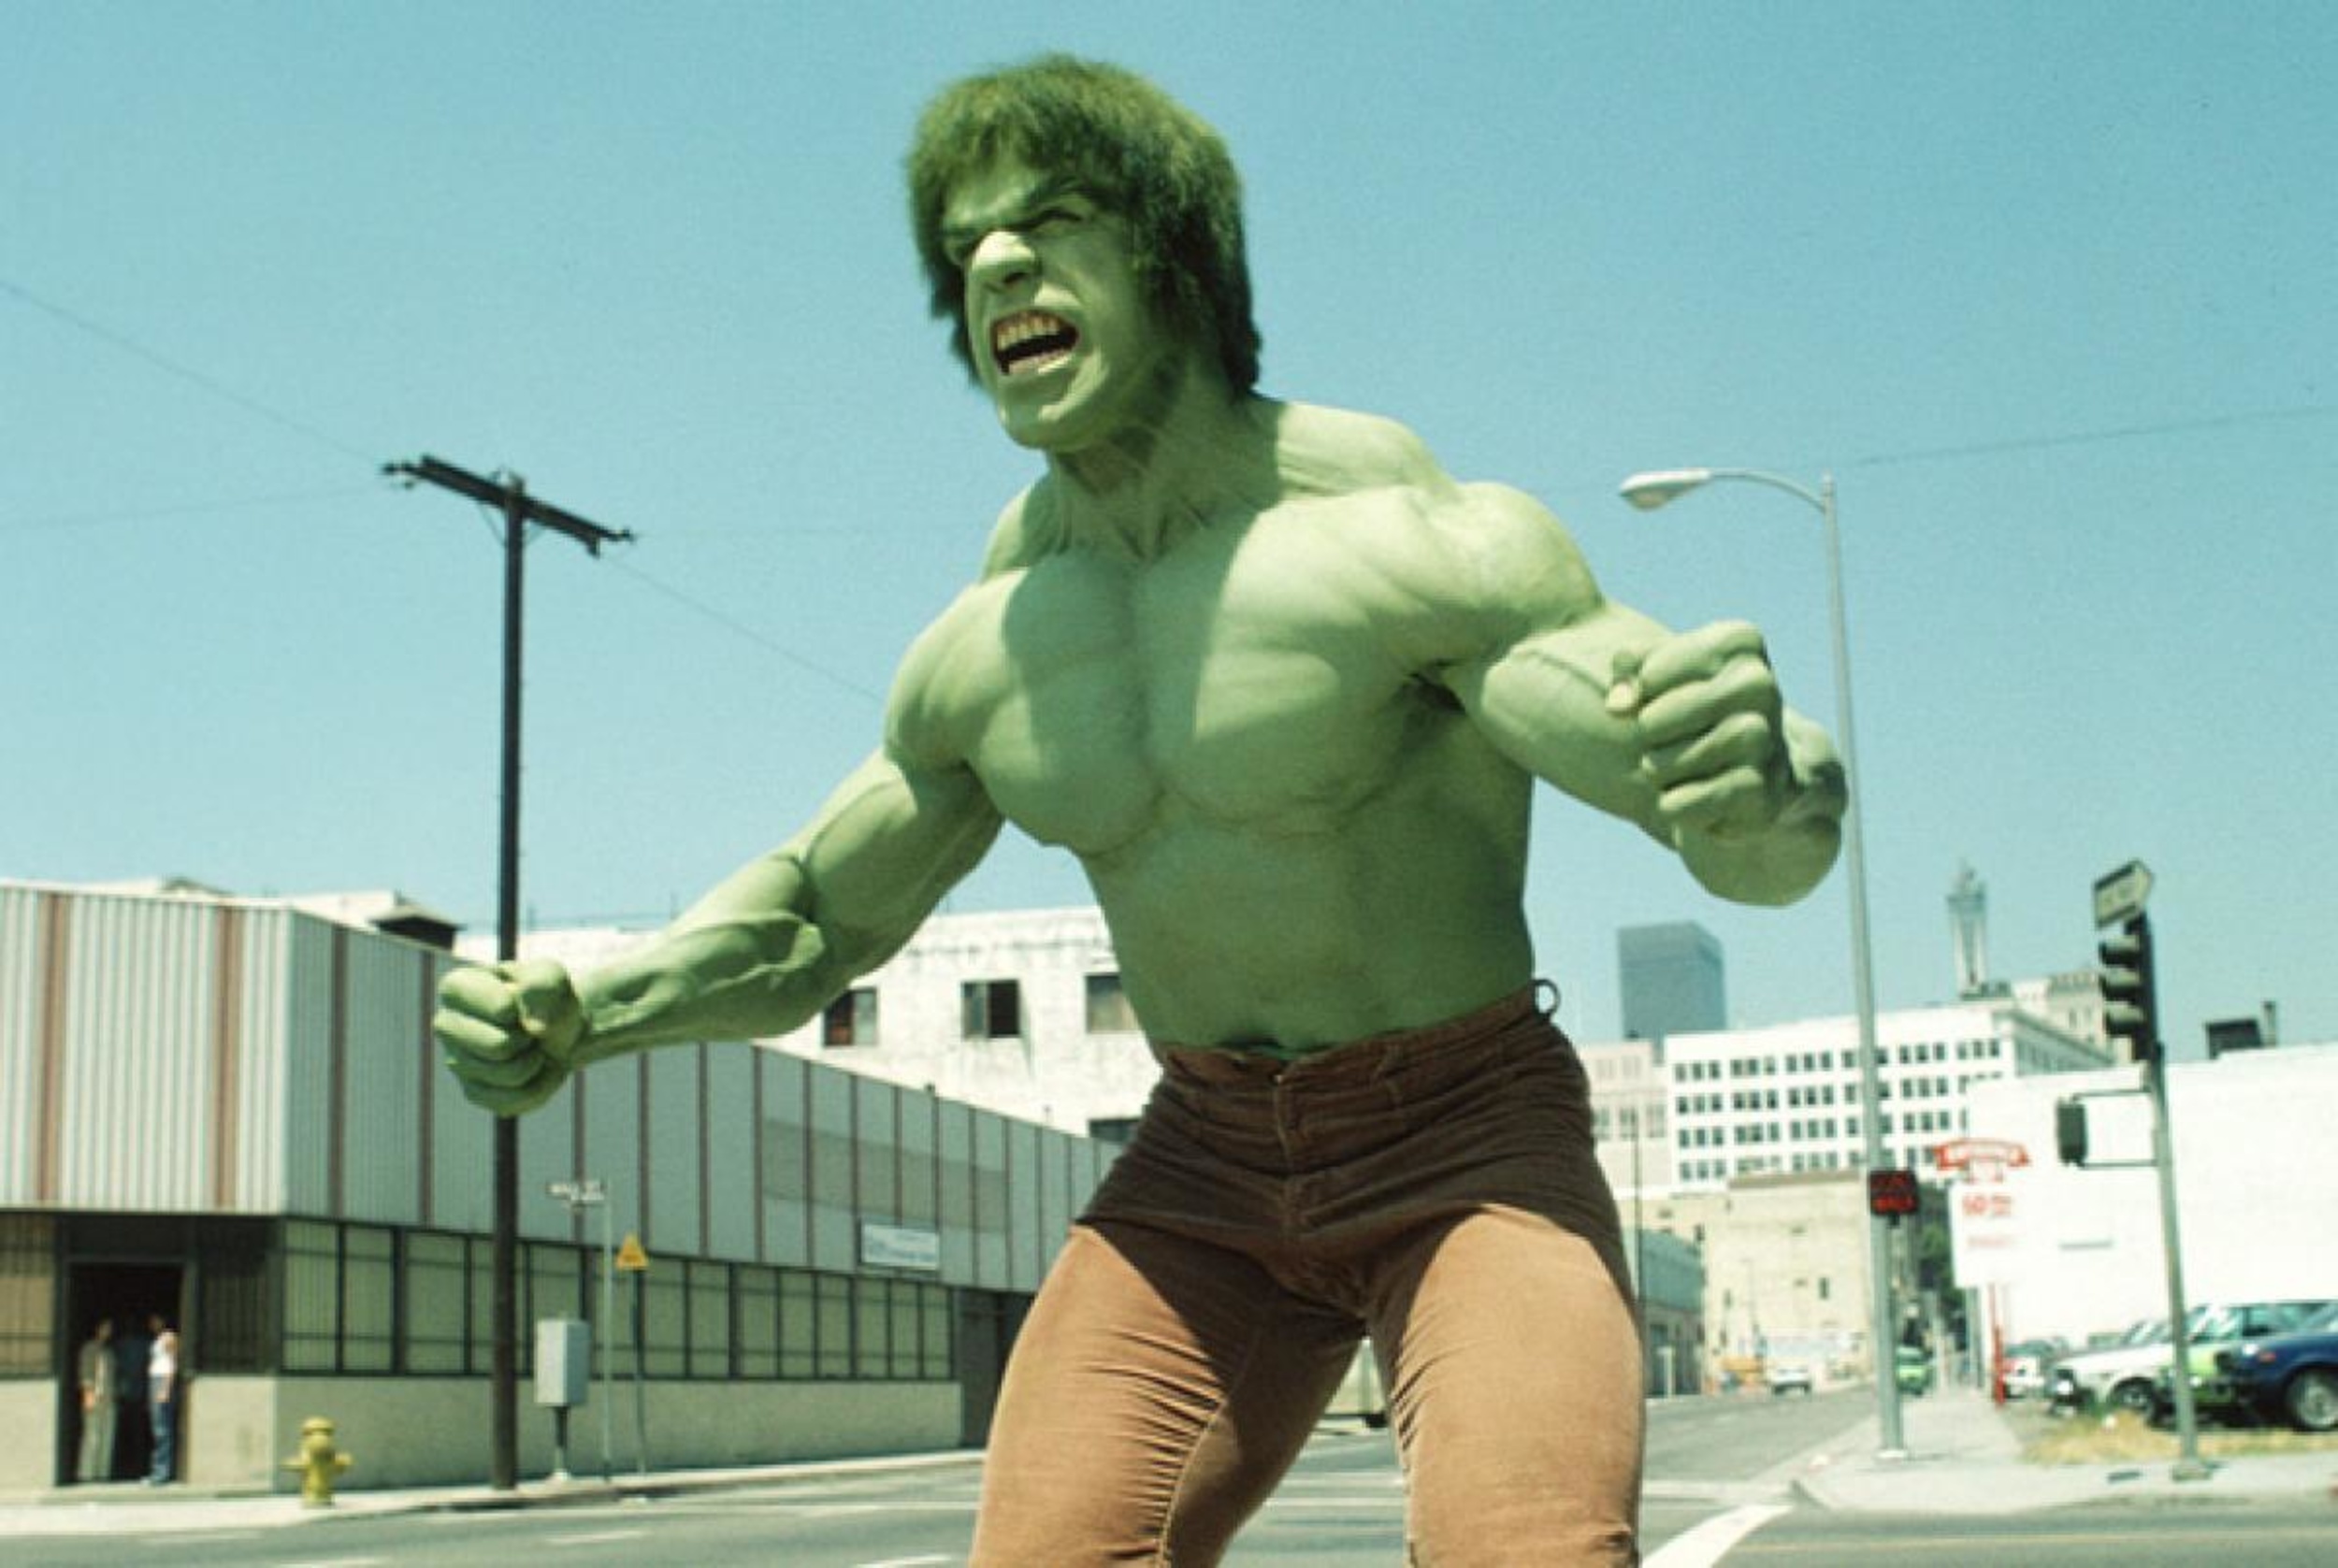 <p>The original series from the late 1970s and into the '80s starring the late Bill Bixby and Lou Ferrigno was quite beloved. The Hulk character has seen many versions on film, but this non-animated series holds up well on TV. So, why not give it another go on television? </p><p>You may also like: <a href='https://www.yardbarker.com/entertainment/articles/20_facts_you_might_not_know_about_the_hunt_for_red_october/s1__37662044'>20 facts you might not know about 'The Hunt for Red October'</a></p>